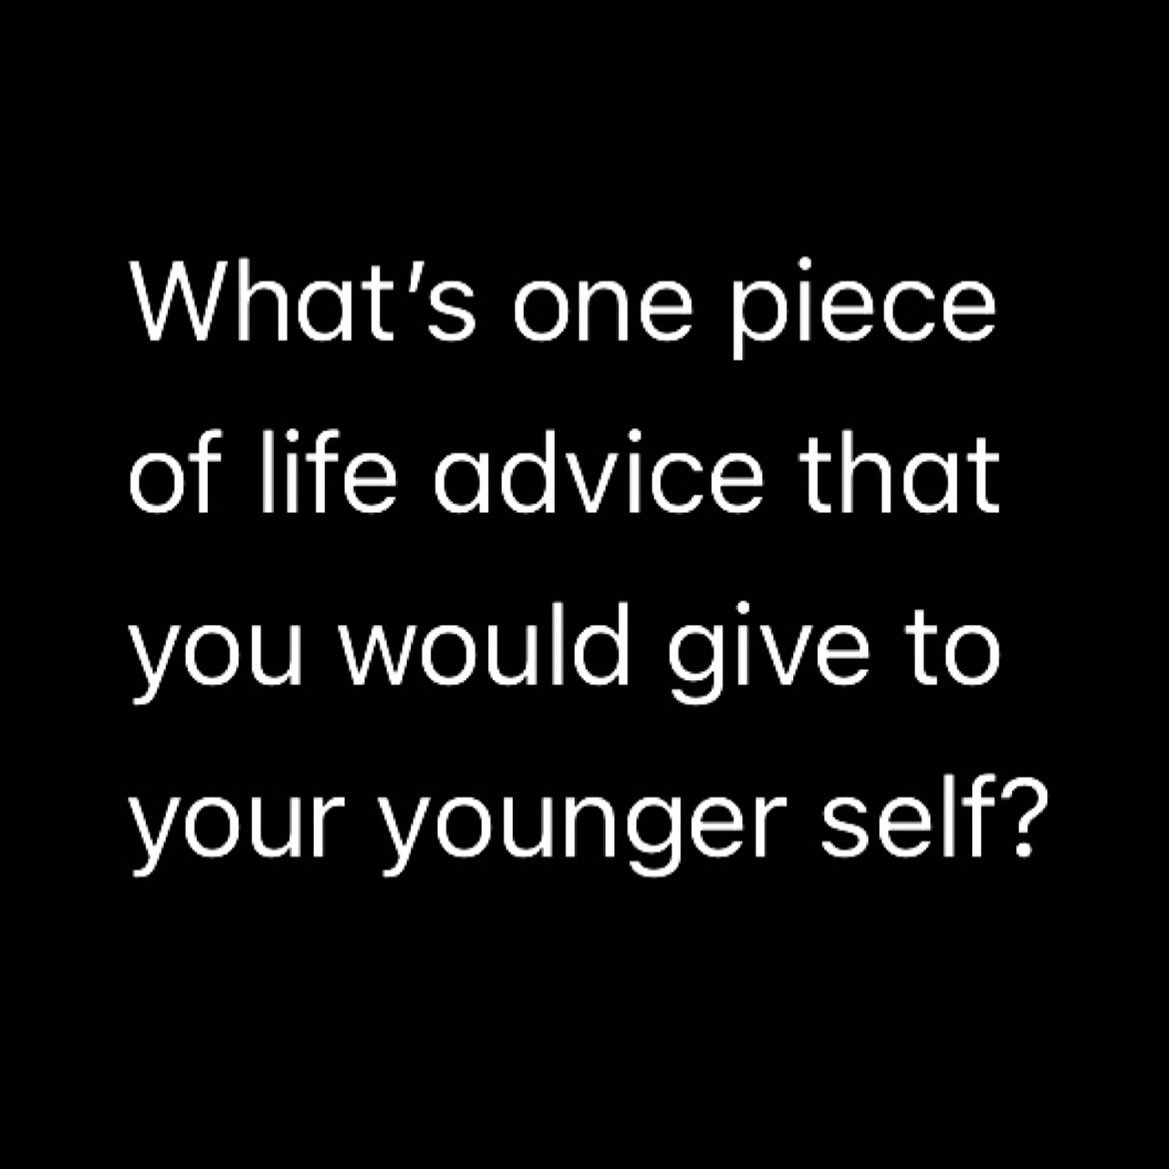 Think back to your 30 year old, or 20 year old, or 16 year old self&hellip; 

Knowing what you know today, 

What&rsquo;s something you would tell them to prepare them for what&rsquo;s to come?